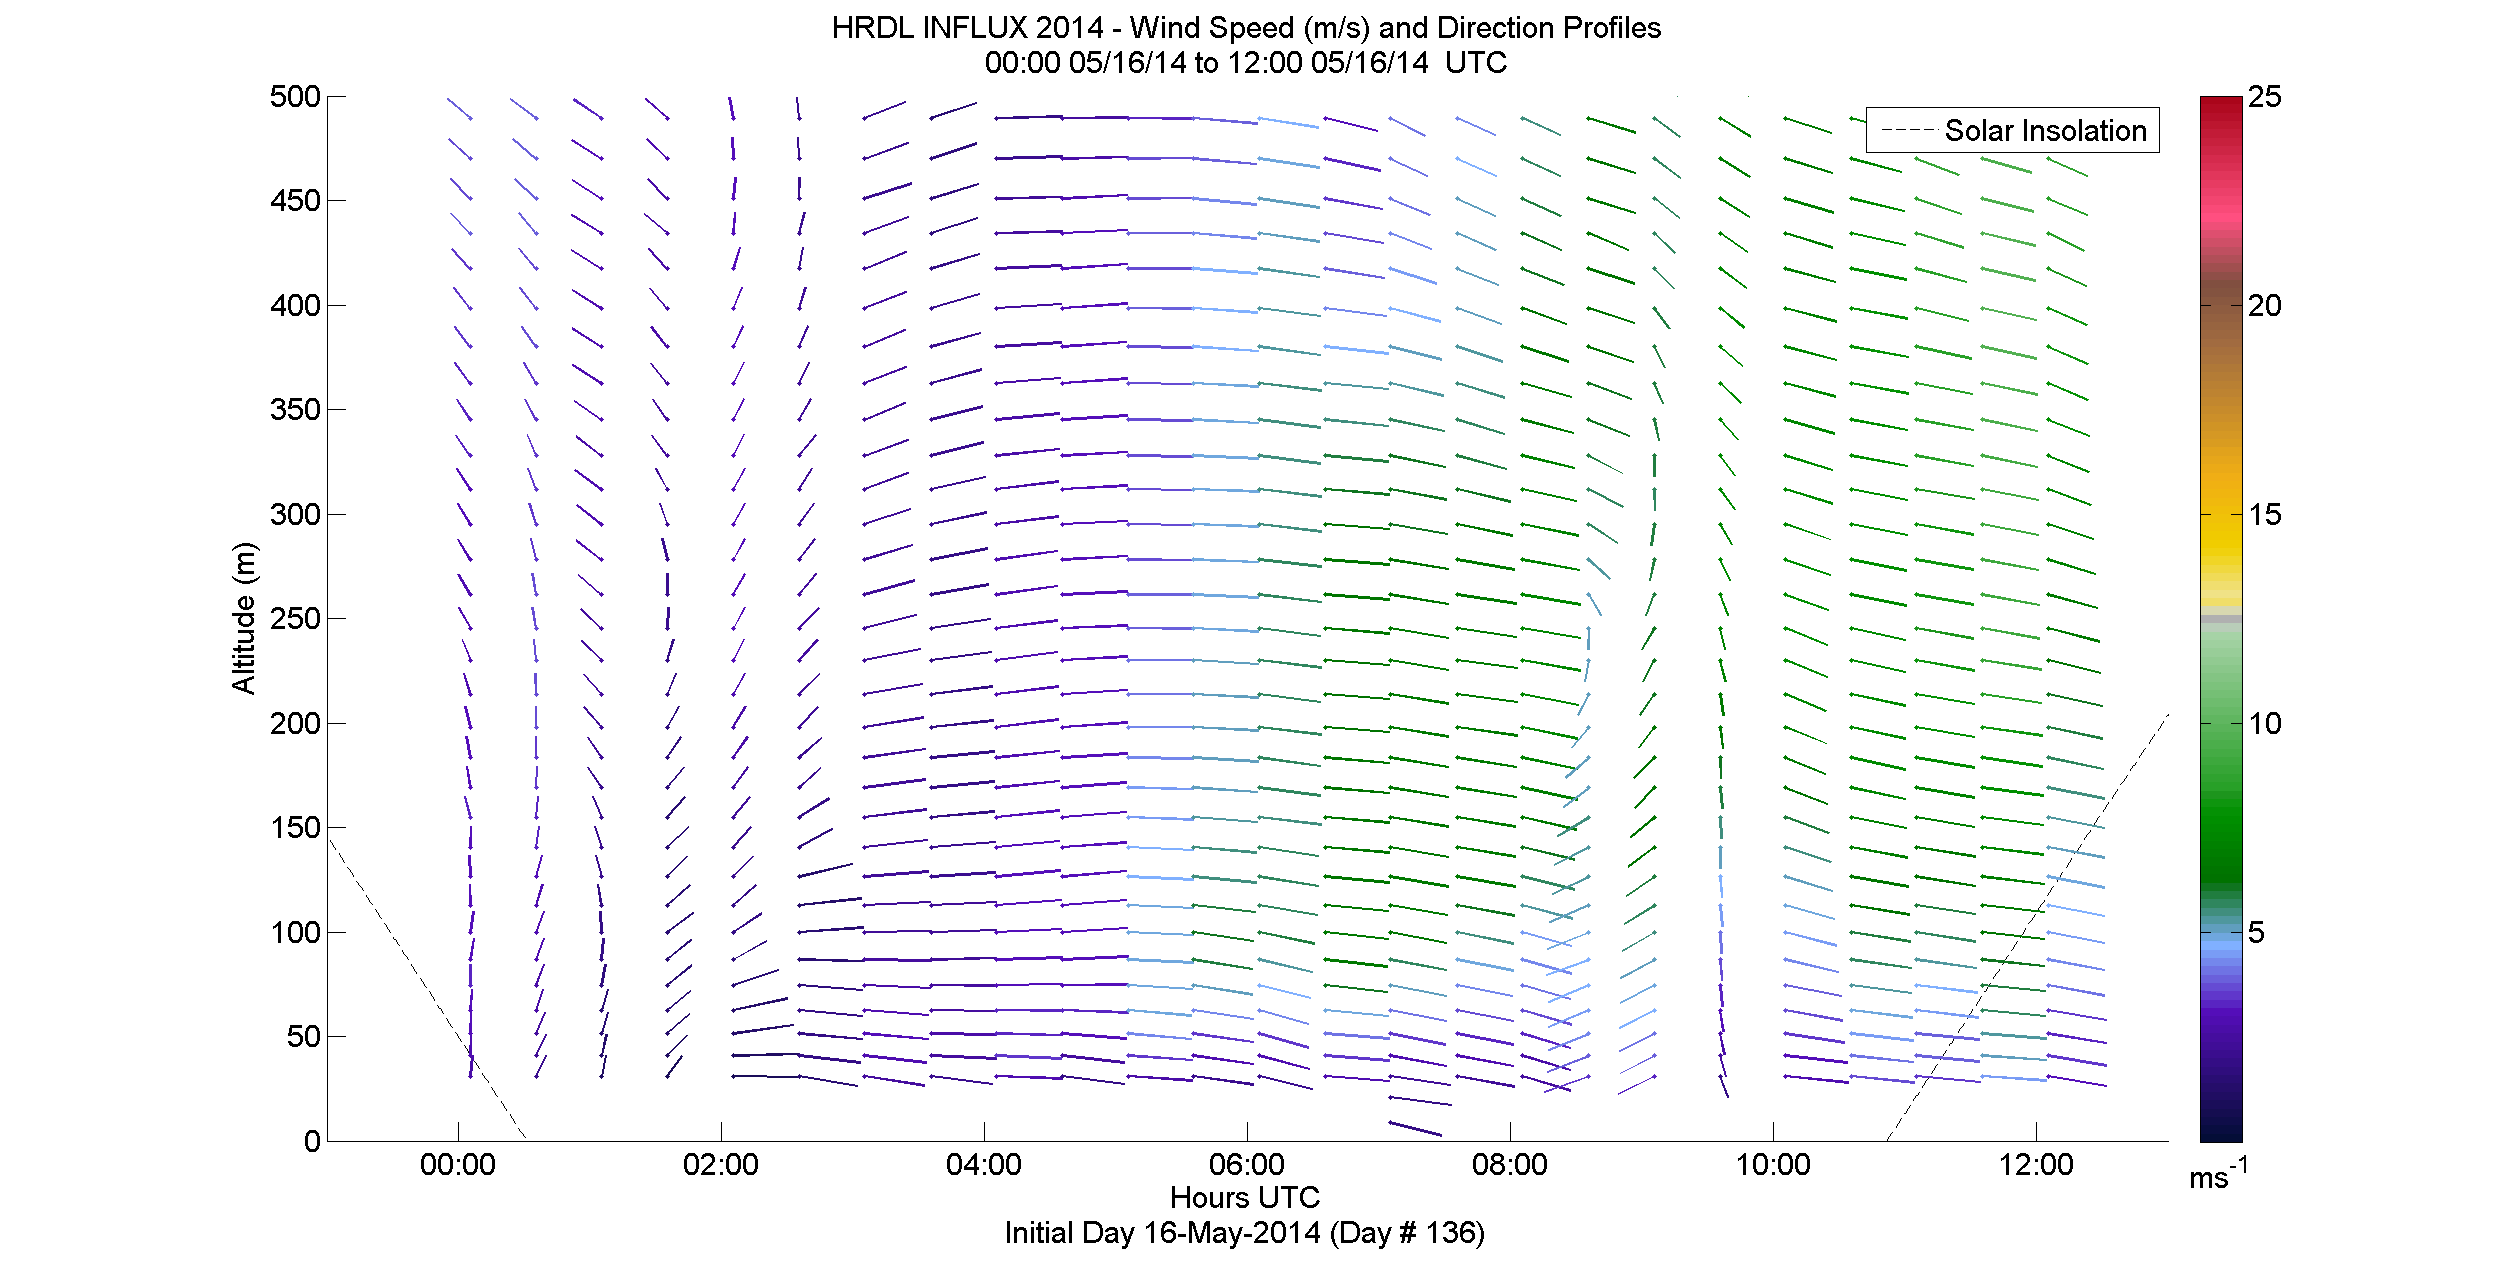 HRDL speed and direction profile - May 16 am